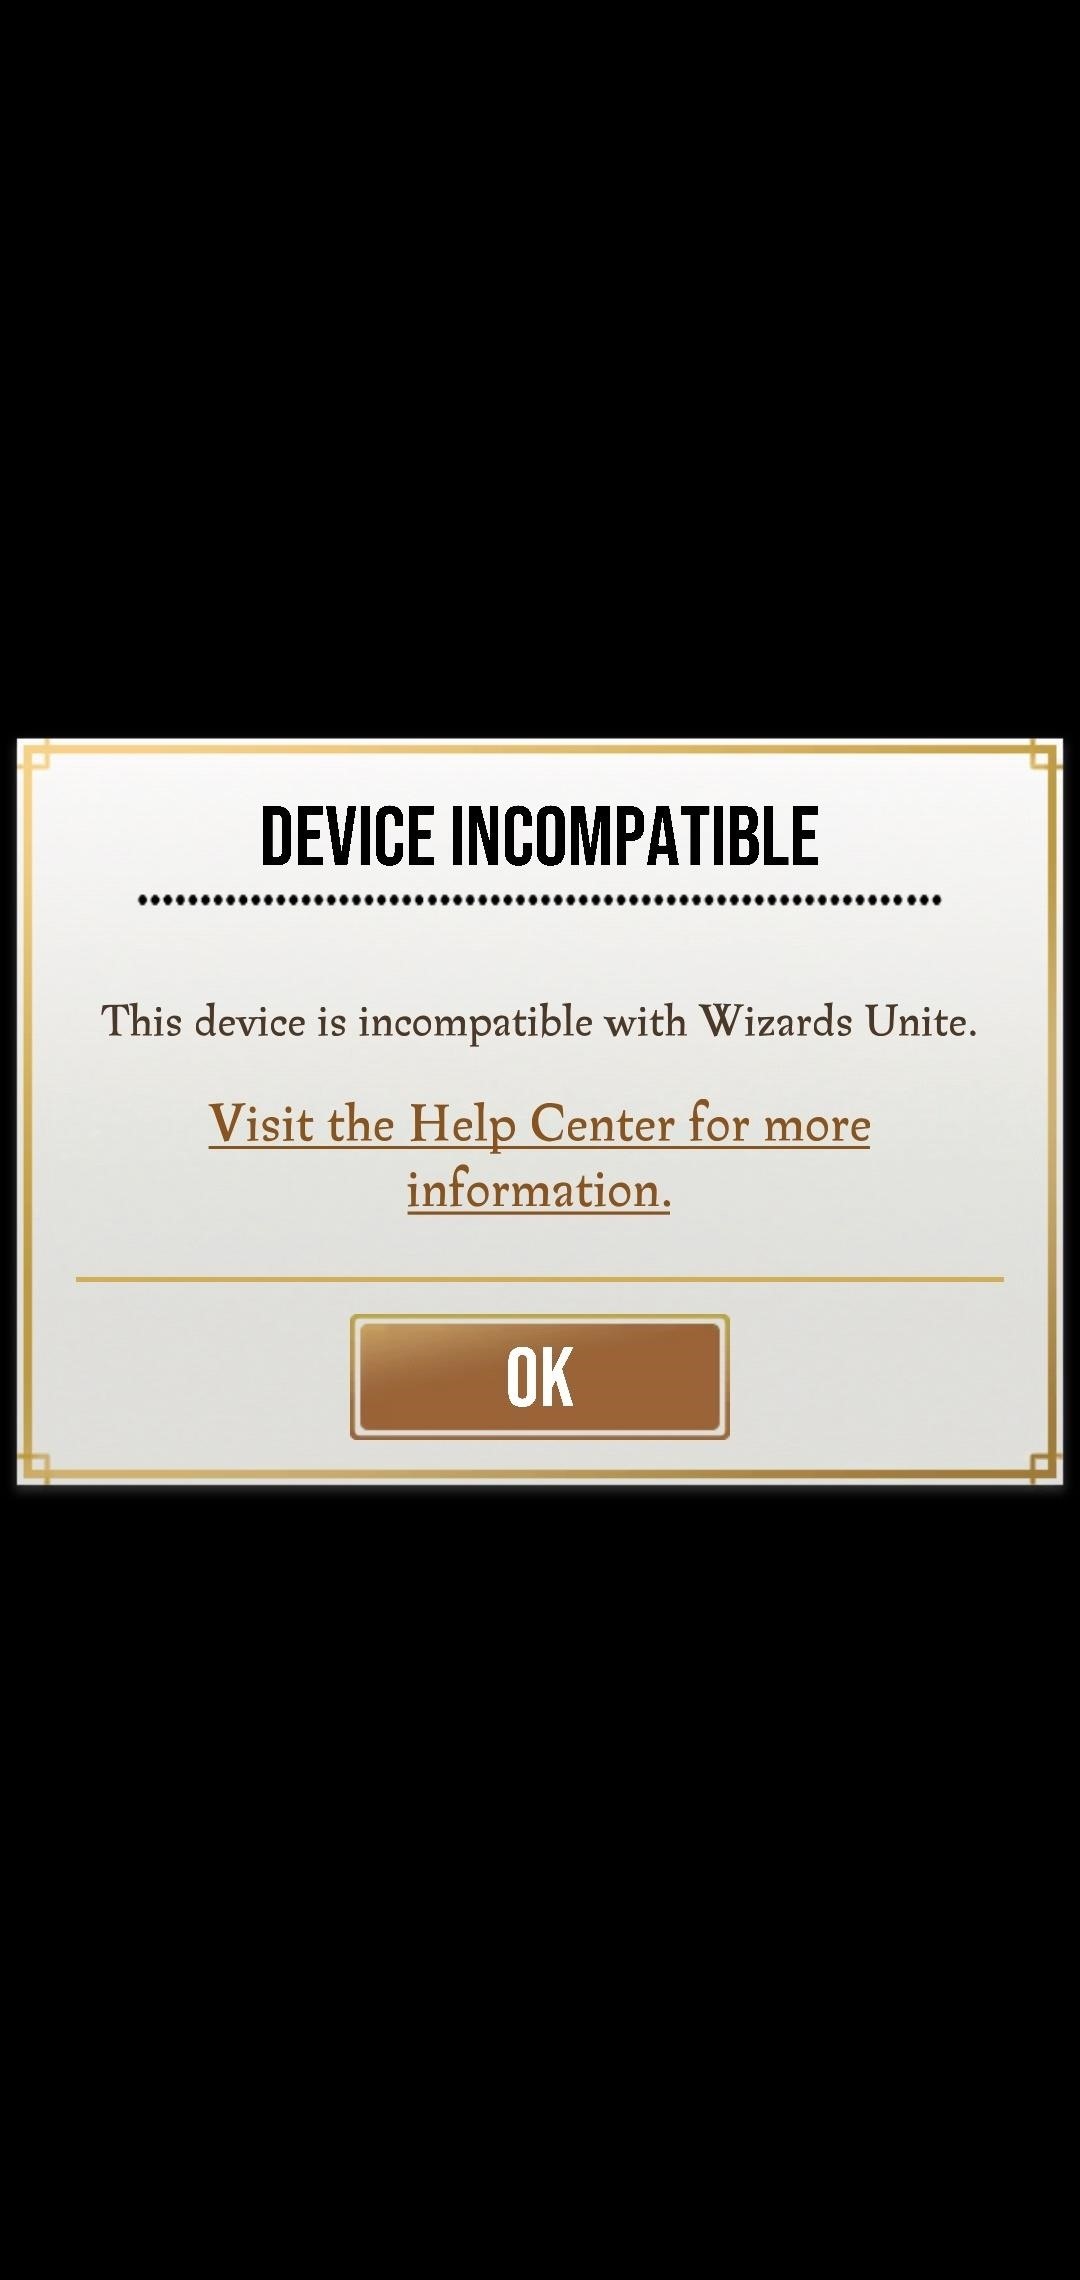 How to Fix the Wizards Unite 'Device Incompatible' Error for Rooted Android Phones